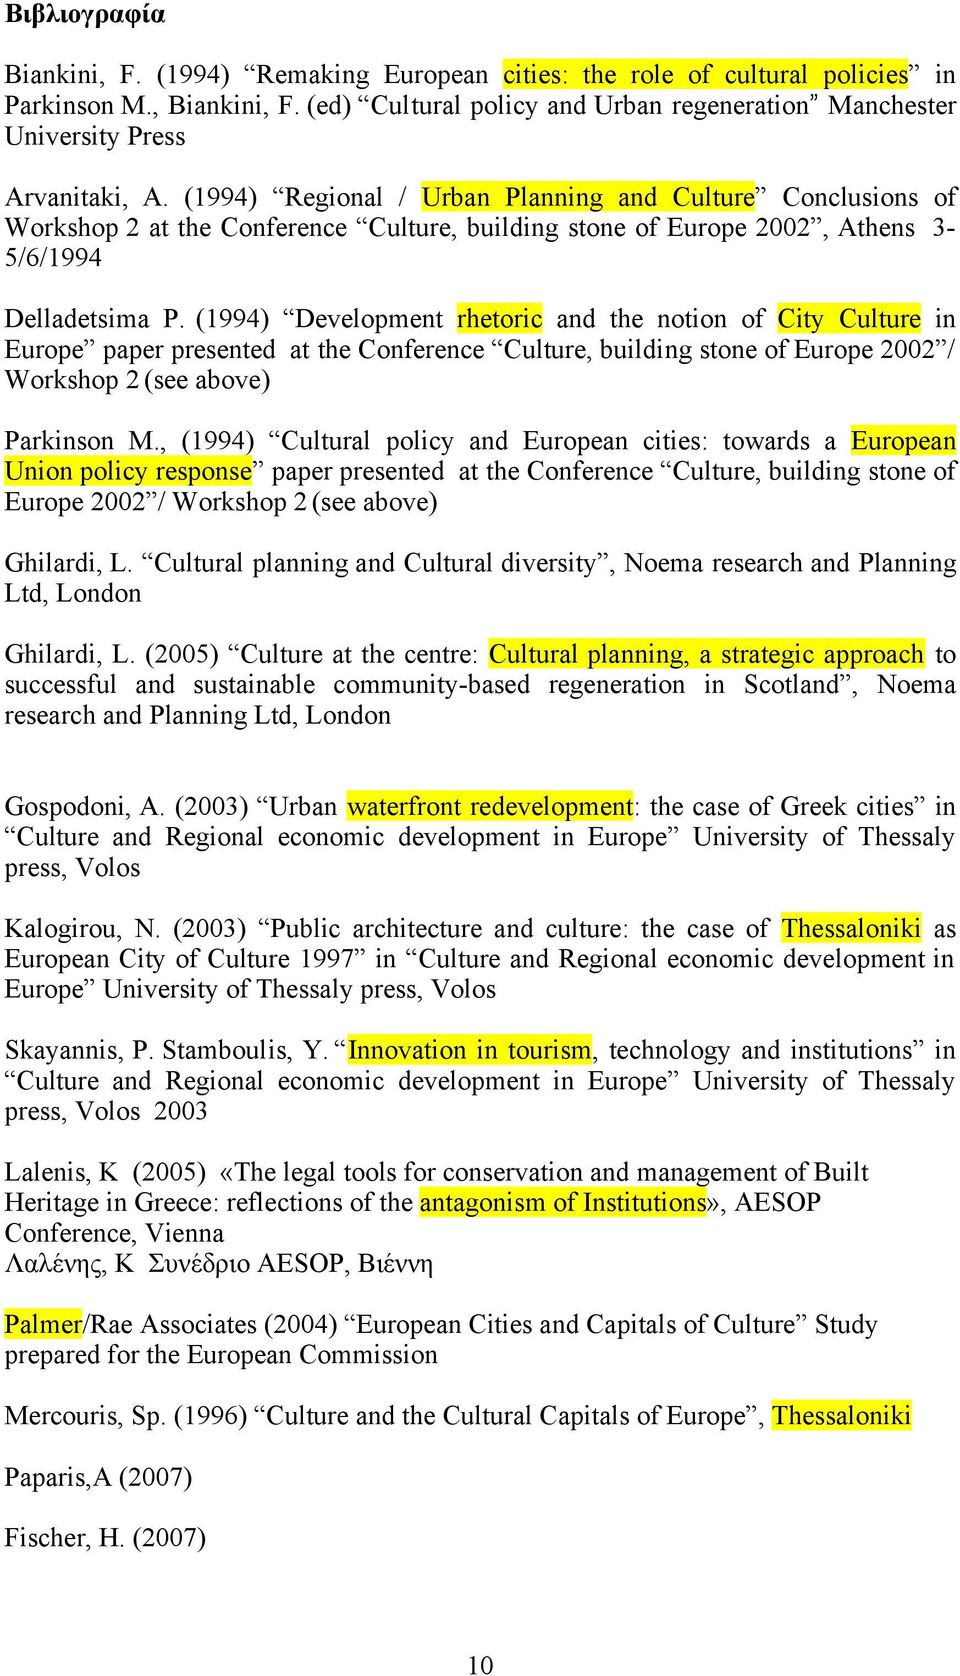 (1994) Regional / Urban Planning and Culture Conclusions of Workshop 2 at the Conference Culture, building stone of Europe 2002, Athens 3-5/6/1994 Delladetsima P.